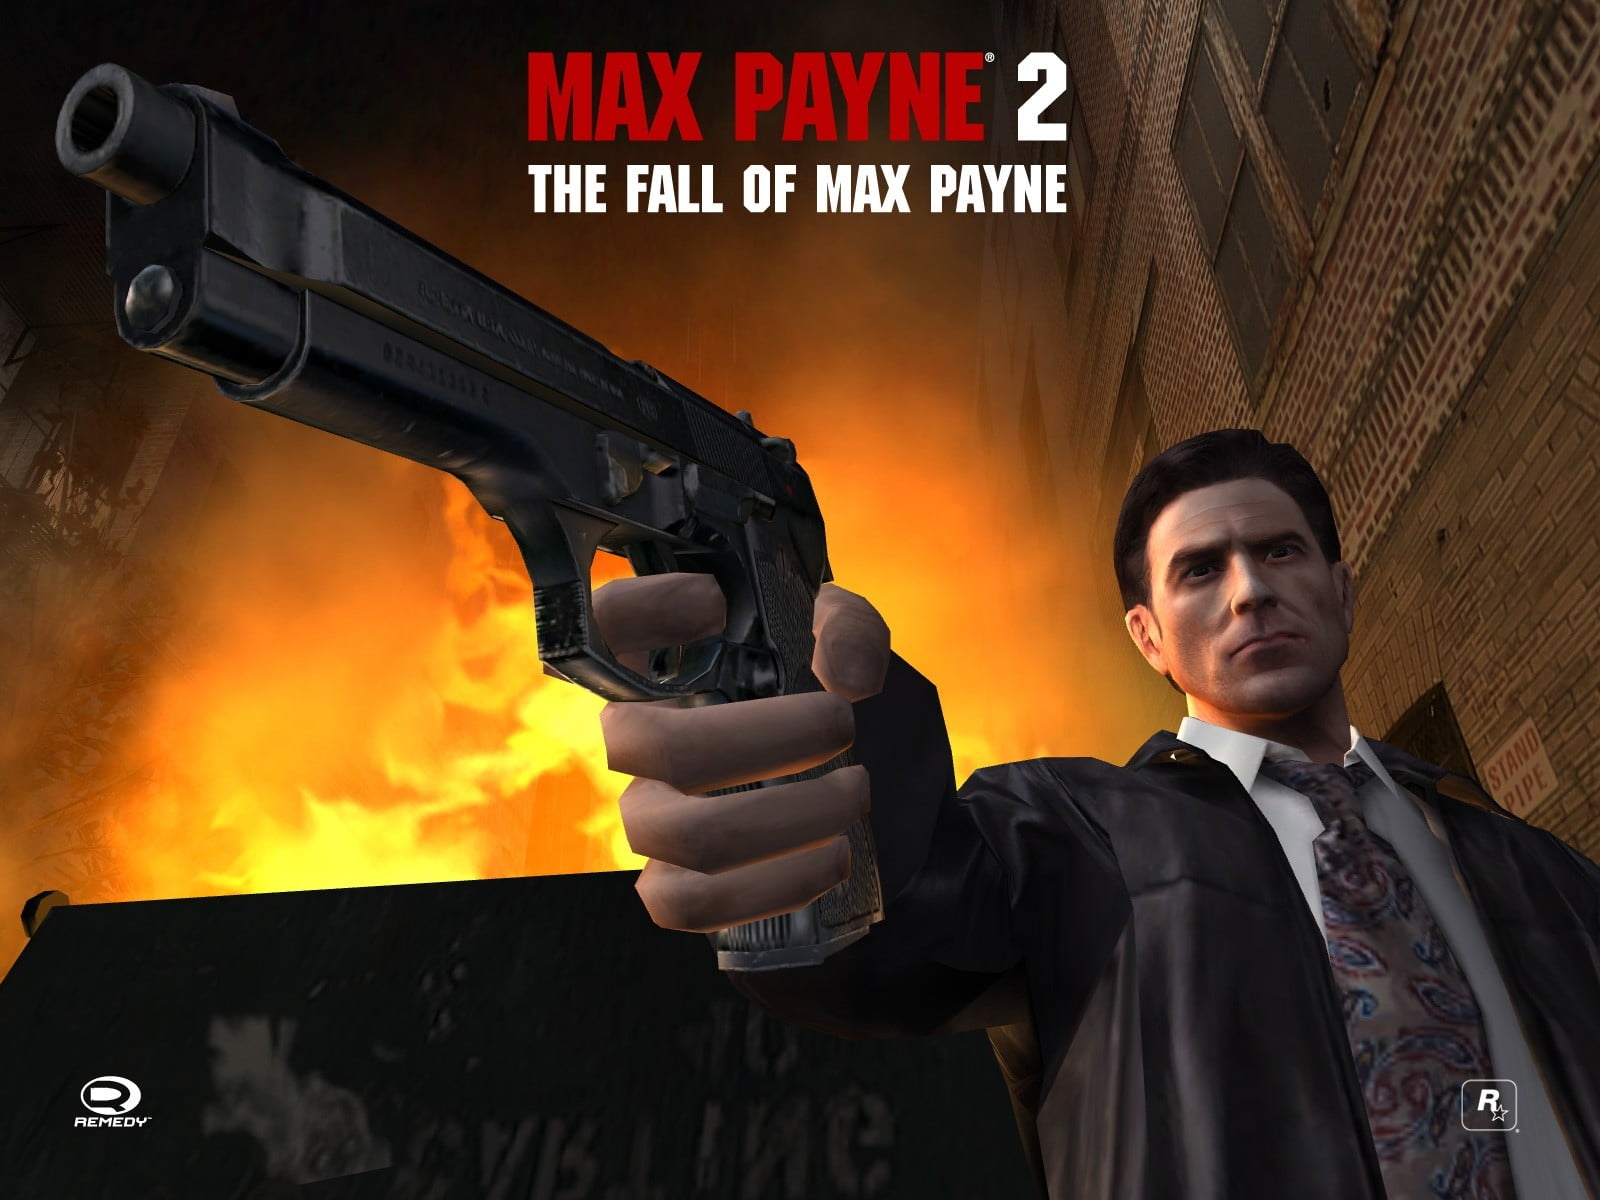 Max Payne 2 The Fall of Max Payne game poster